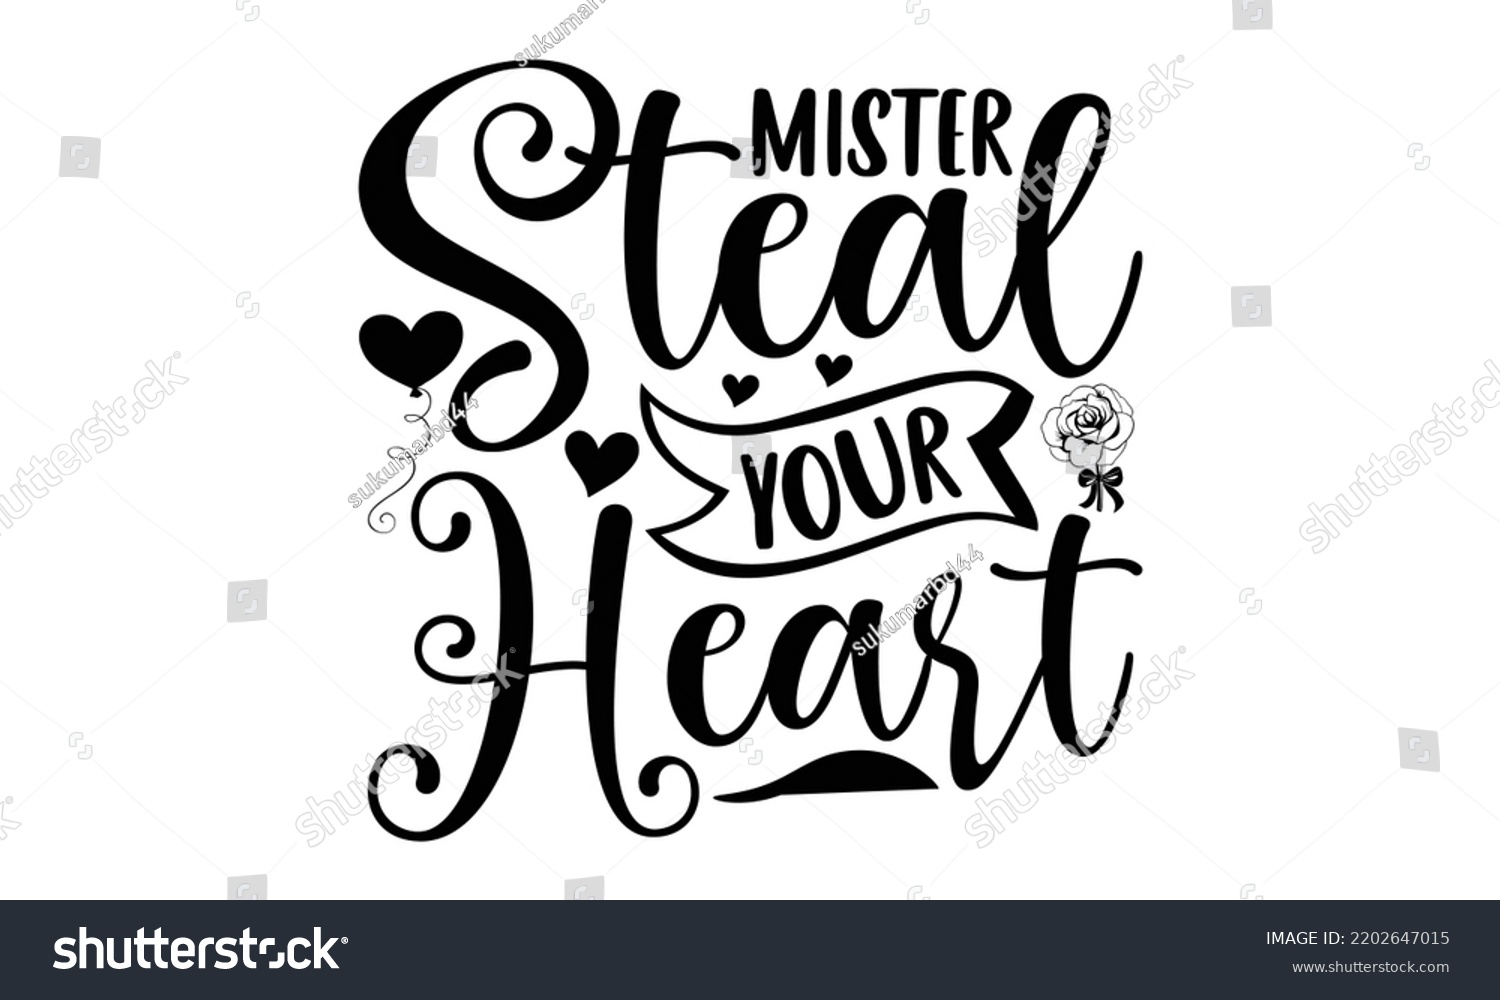 SVG of Mister Steal Your Heart - Valentine's Day 2023 quotes svg design, Hand drawn vintage hand lettering, This illustration can be used as a print on t-shirts and bags, stationary or as a poster. svg